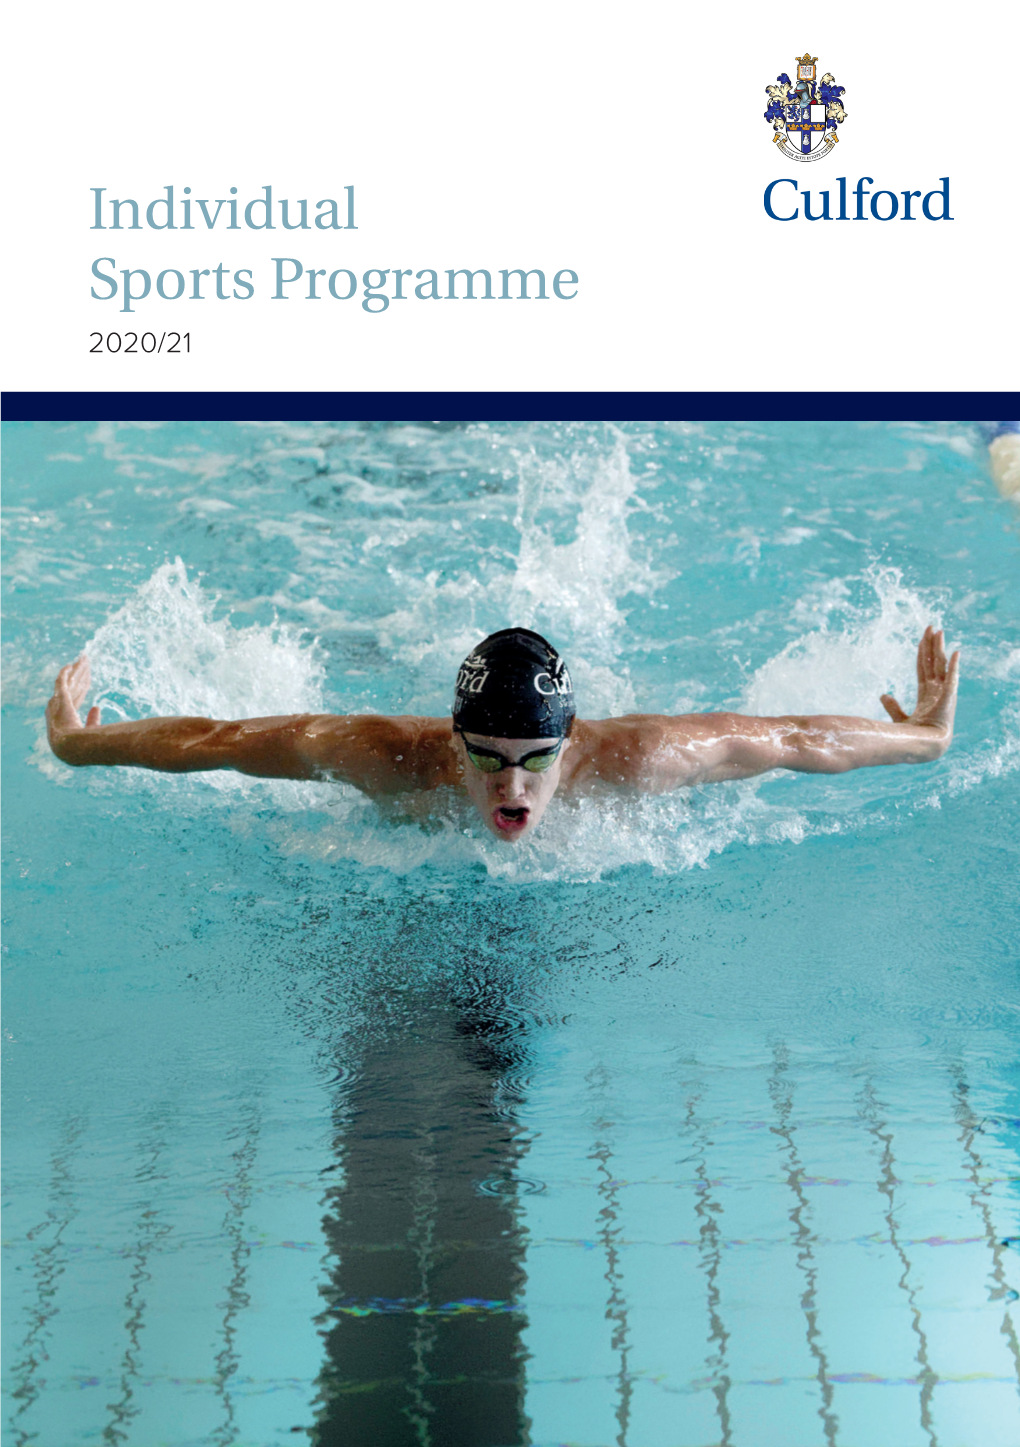 Individual Sports Programme 2020/21 Introduction